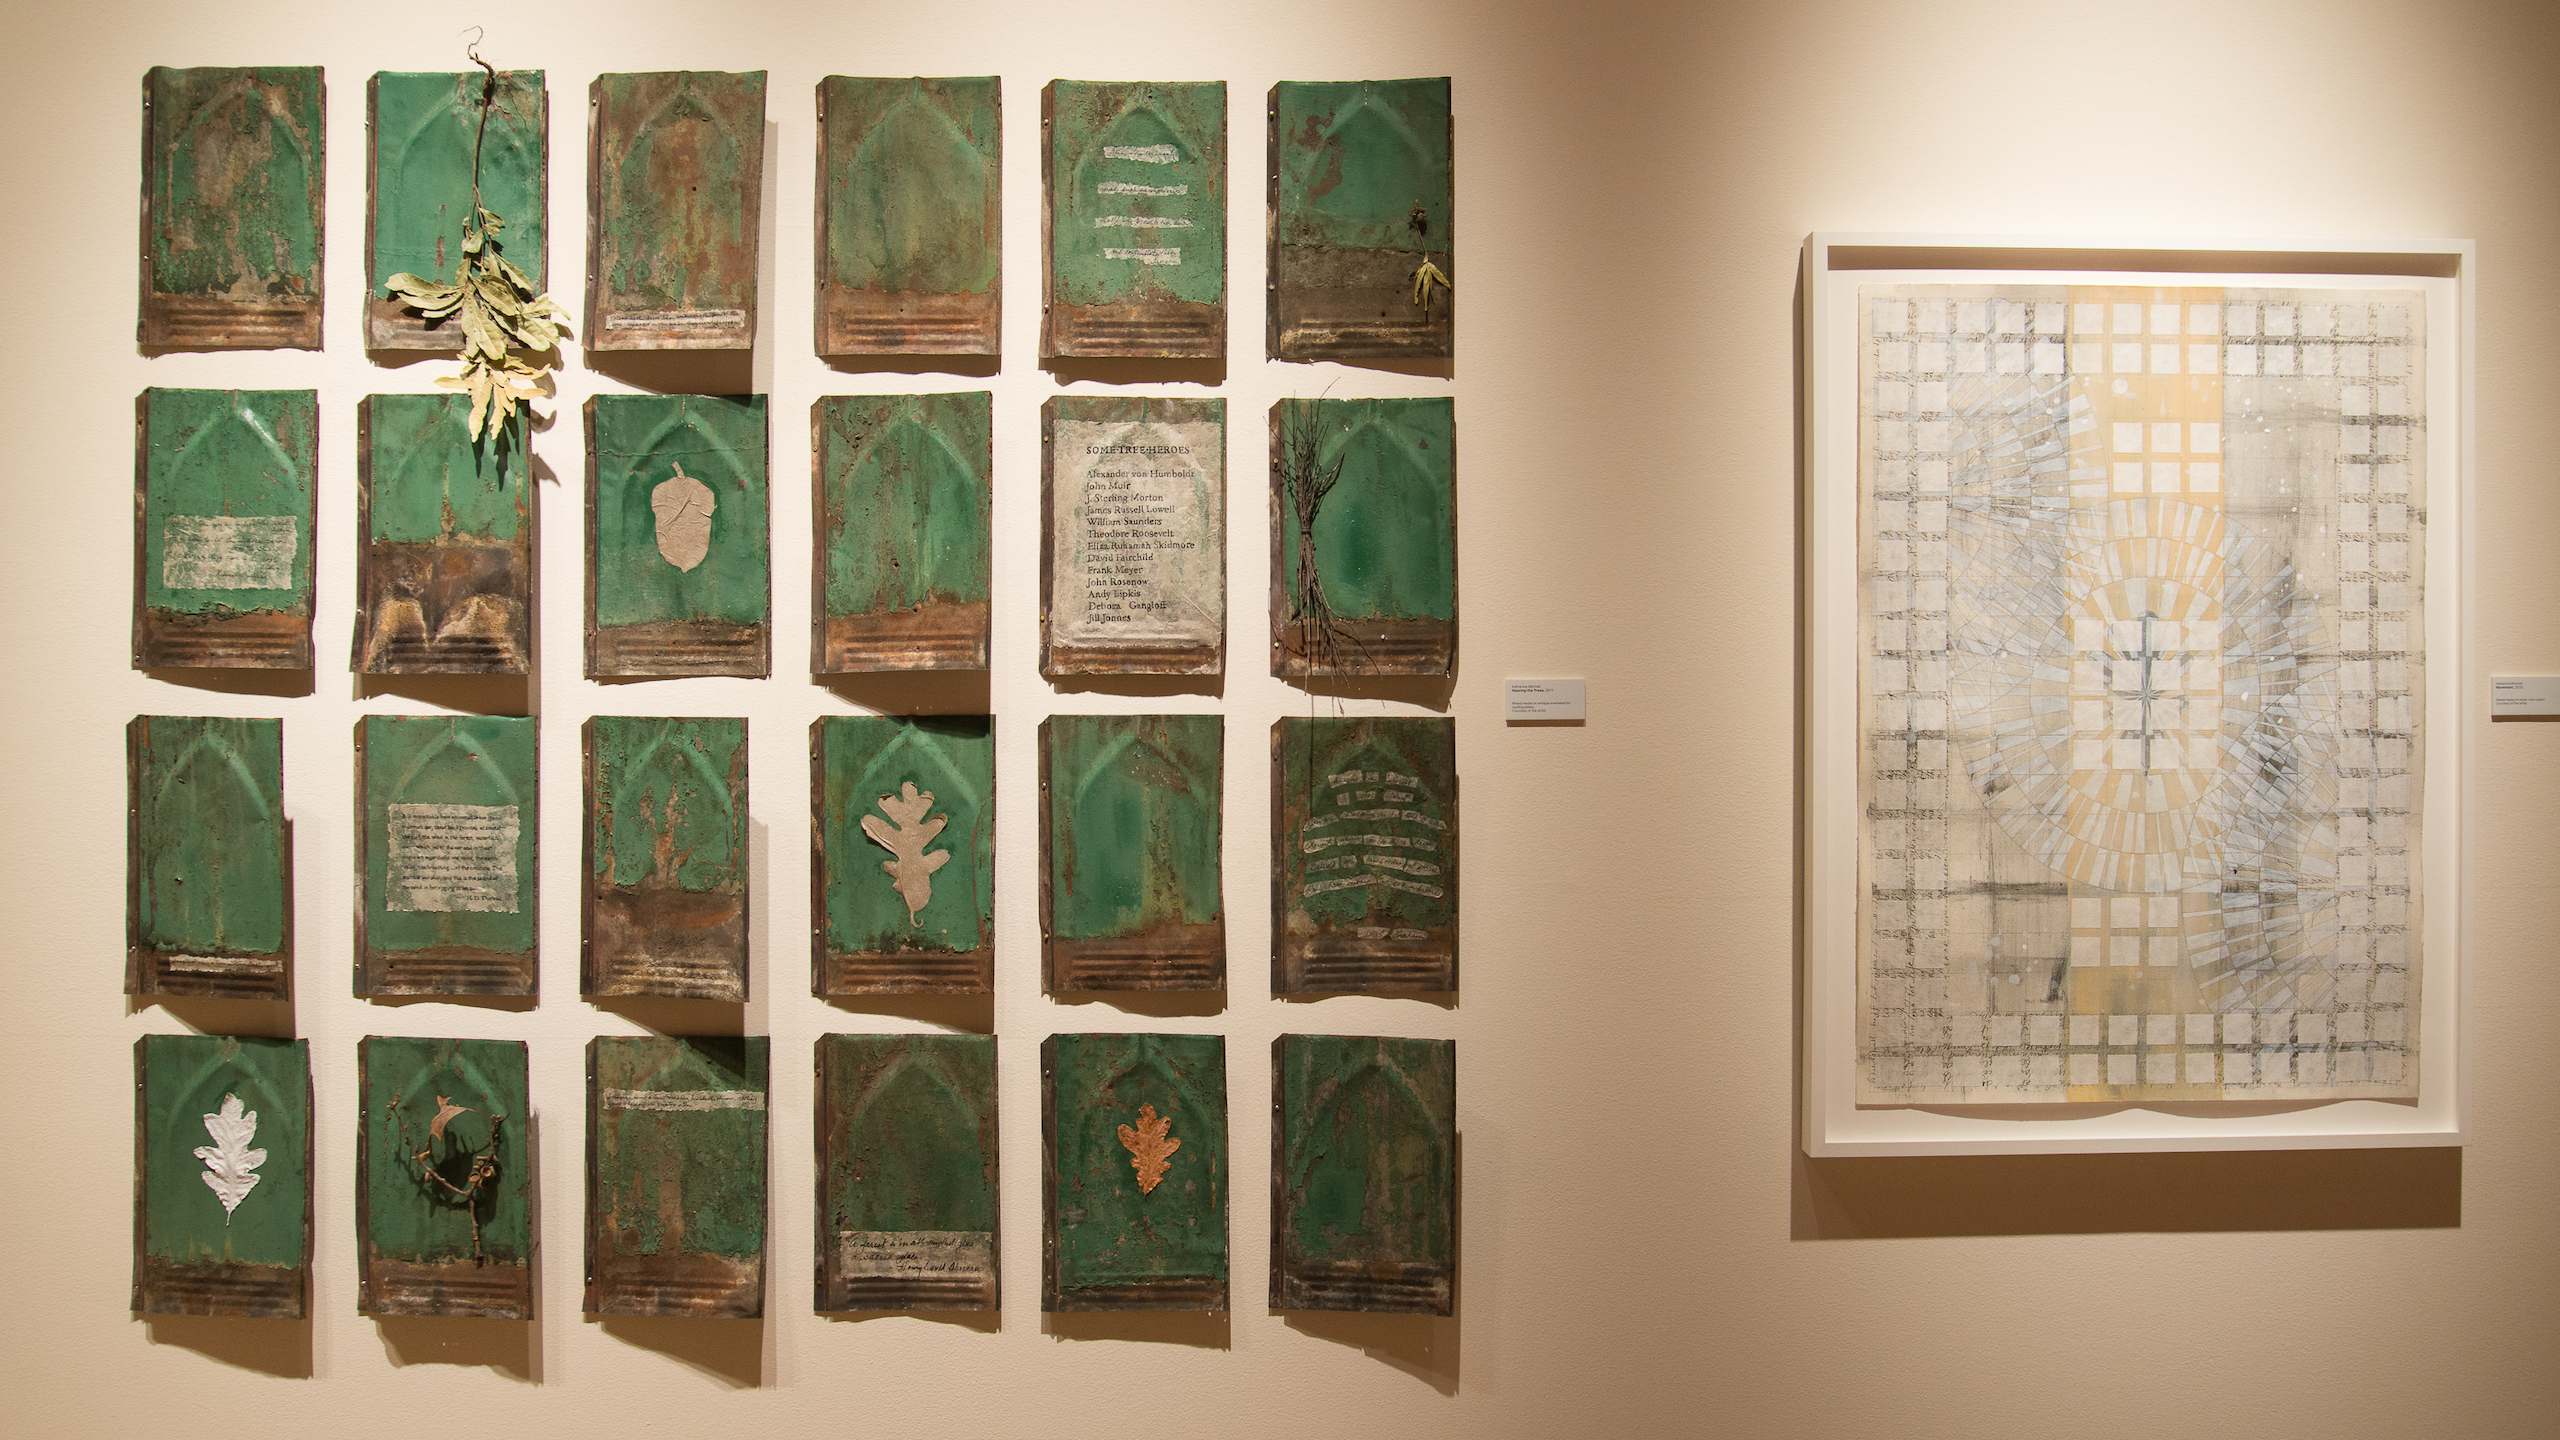 Hearing the Trees: Katherine Mitchell in the Mezzanine Gallery